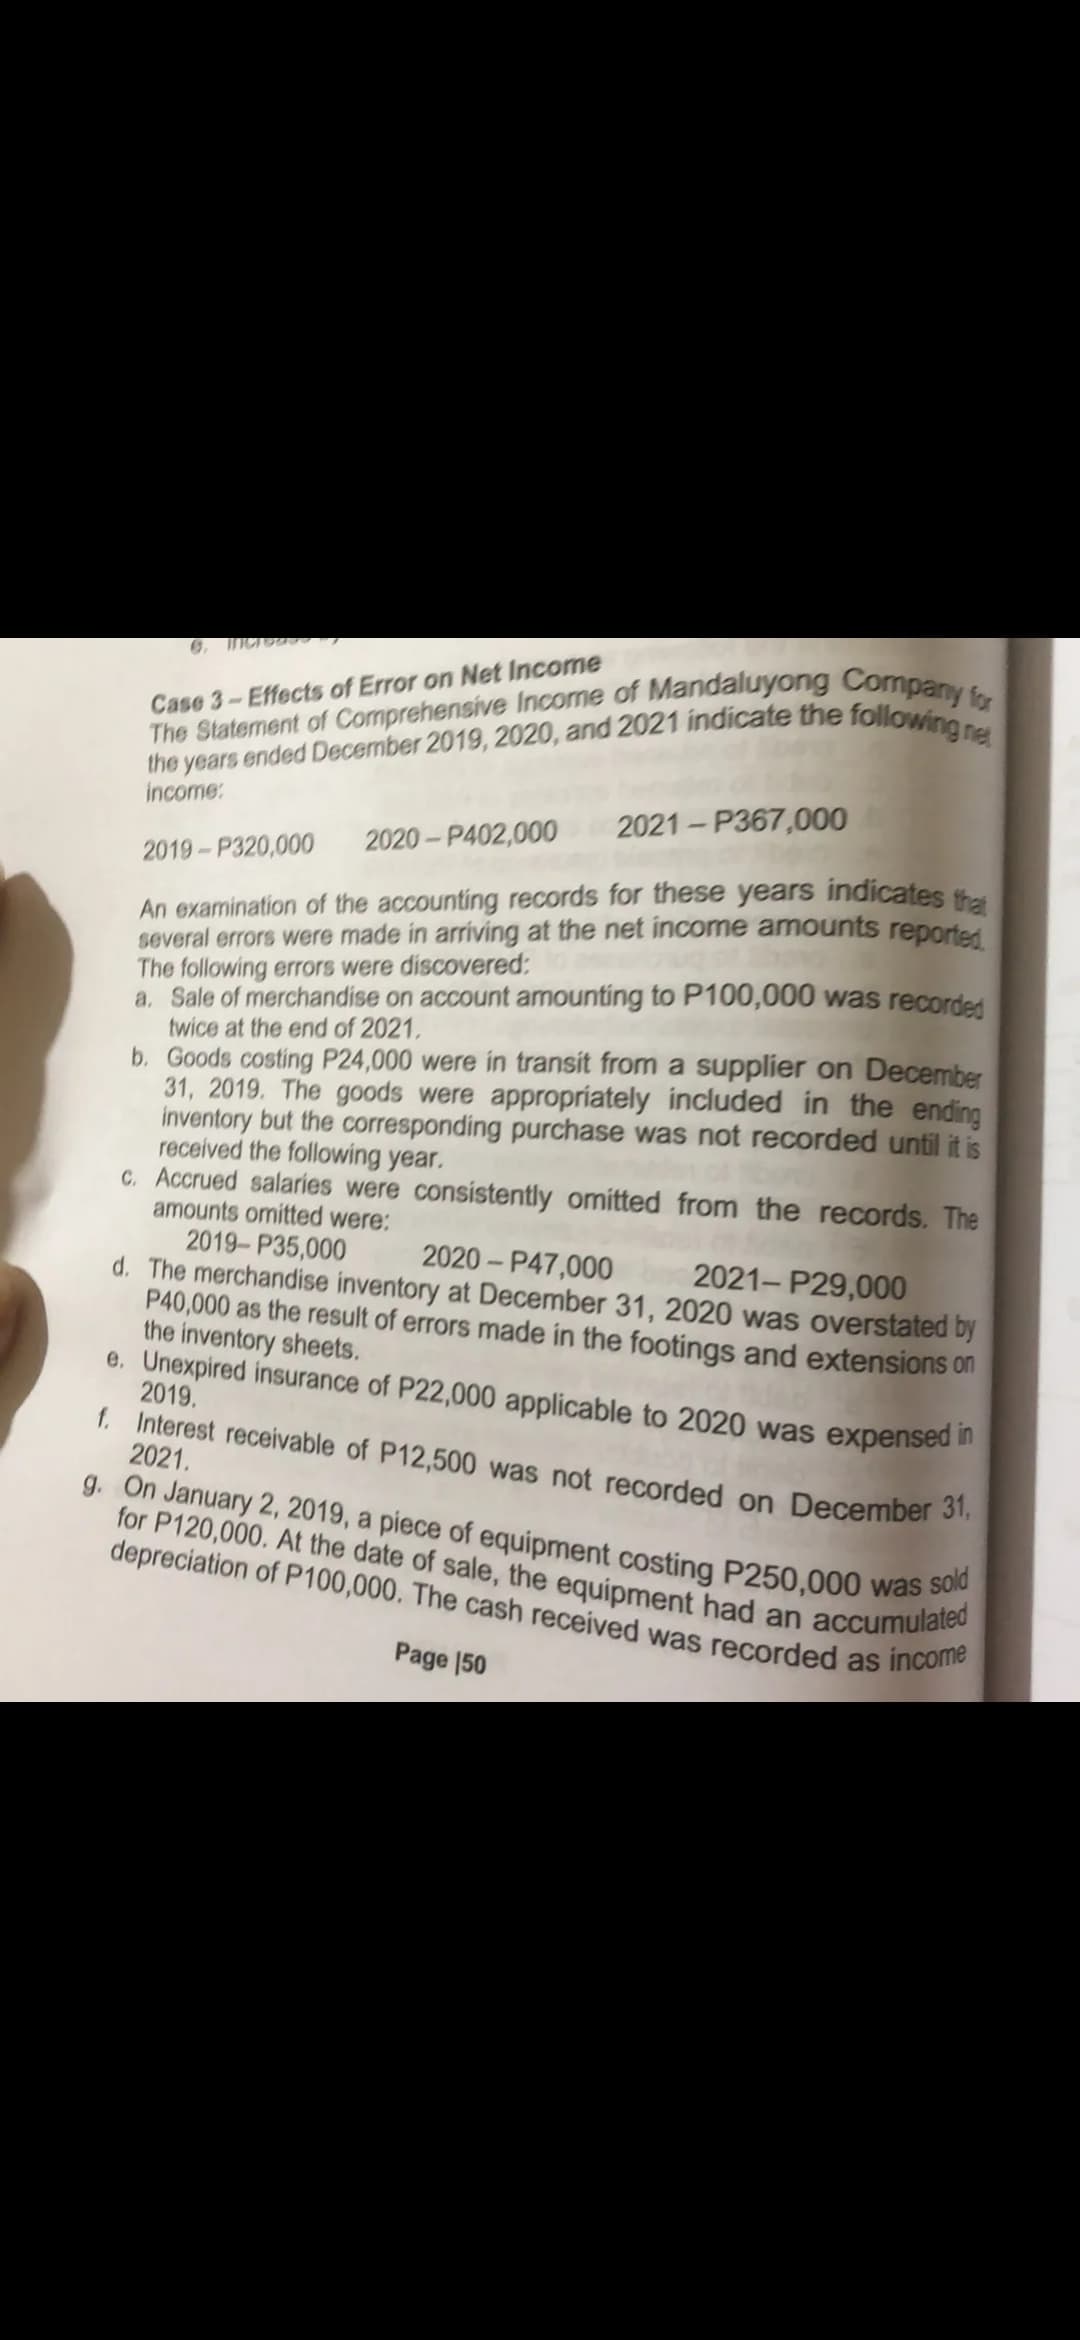 the years ended December 2019, 2020, and 2021 indicate the following net
g. On January 2, 2019, a piece of equipment costing P250,000 was sold
for P120,000. At the date of sale, the equipment had an accumulated
depreciation of P100,000. The cash received was recorded as income
Case 3-Effects of Error on Net Income
income:
2021 - P367,000
2020-P402,000
2019-P320,000
An examination of the accounting records for these years indicates thet
several errors were made in arriving at the net income amounts reported
The following errors were discovered:
a. Sale of merchandise on account amounting to P100,000 was recorded
twice at the end of 2021,
b. Goods costing P24,000 were in transit from a supplier on December
31, 2019. The goods were appropriately included in the ending
inventory but the corresponding purchase was not recorded until it is
received the following year.
C. Accrued salaries were consistently omitted from the records. The
amounts omitted were:
2019-P35,000
2020 - P47,000
2021- P29,000
d. The merchandise inventory at December 31, 2020 was overstated by
P40,000 as the result of errors made in the footings and extensions on
the inventory sheets.
e. Unexpired insurance of P22,000 applicable to 2020 was expensed in
2019.
f. Interest receivable of P12,500 was not recorded on December 31.
2021.
Page 150
